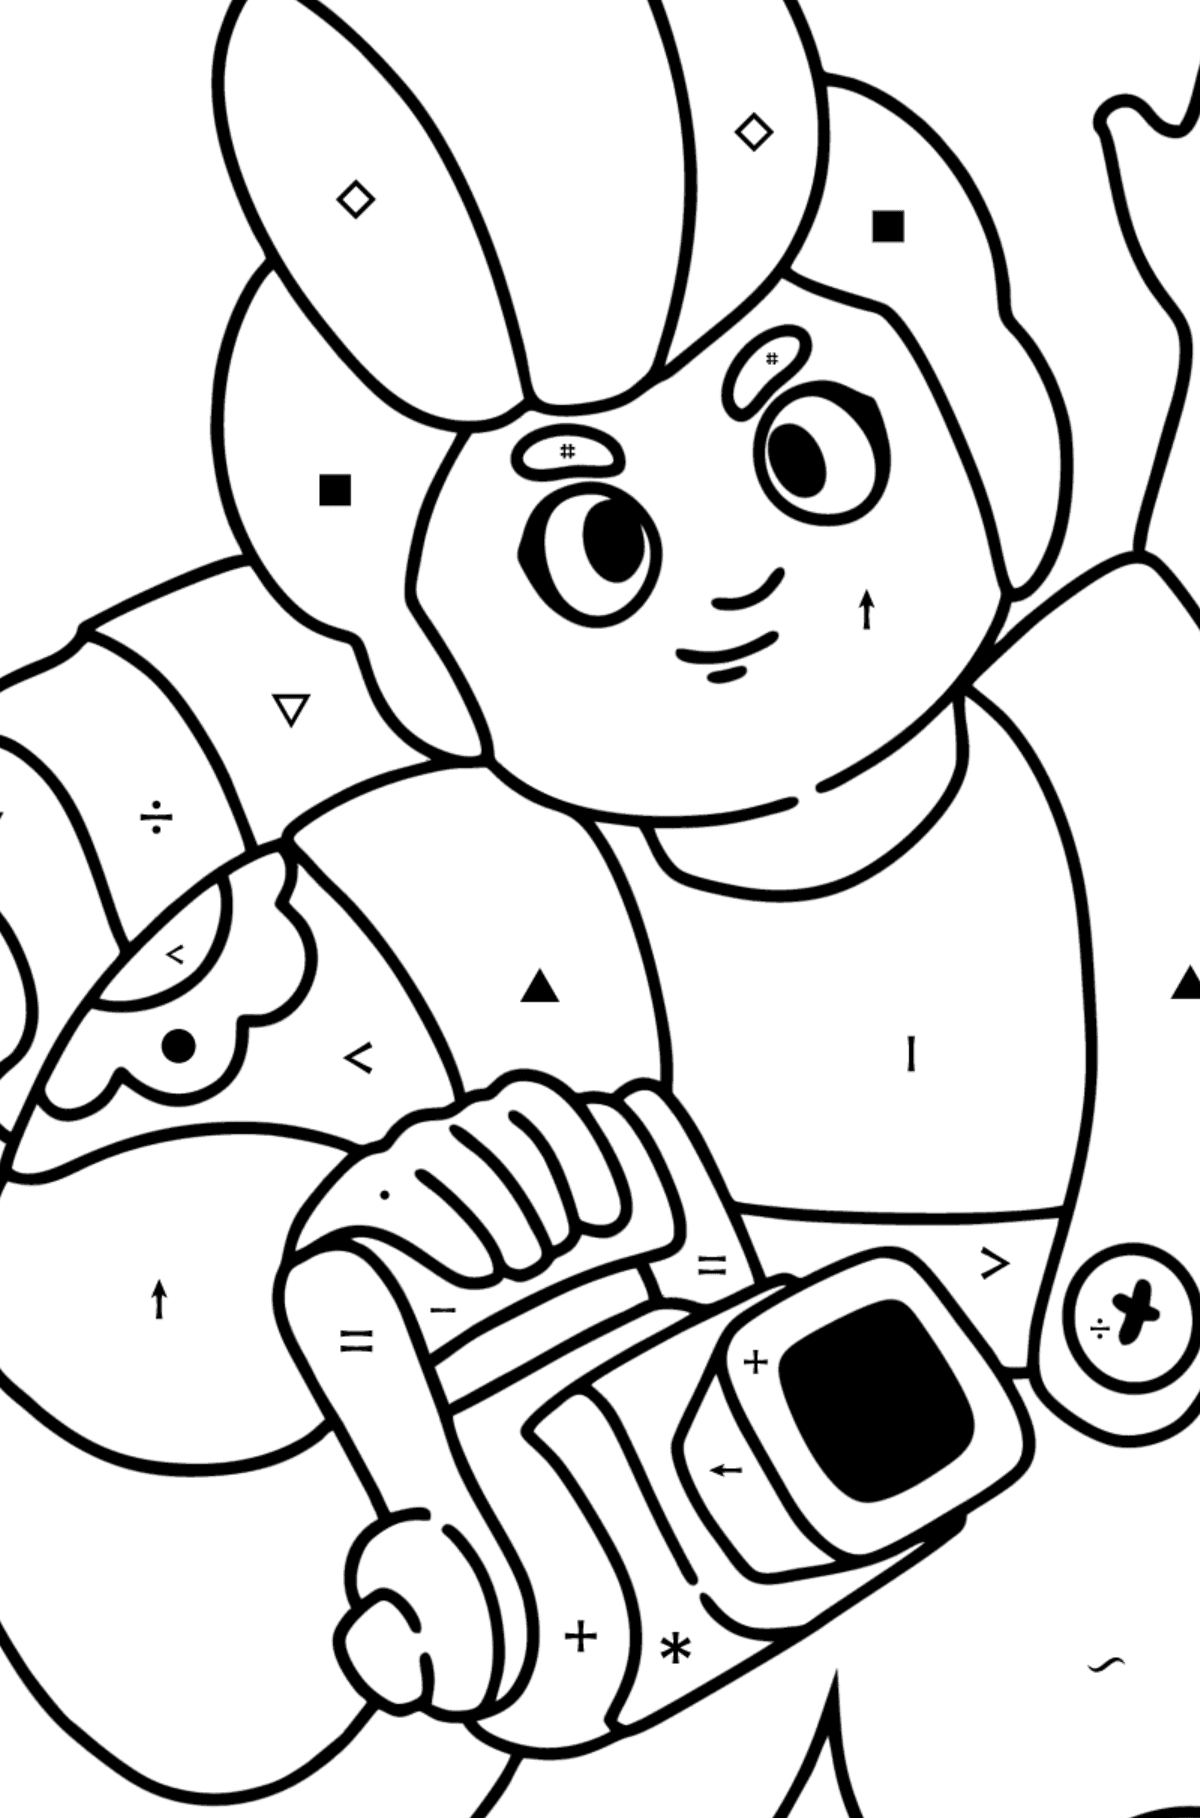 Brawl Stars Pam coloring page - Coloring by Symbols for Kids